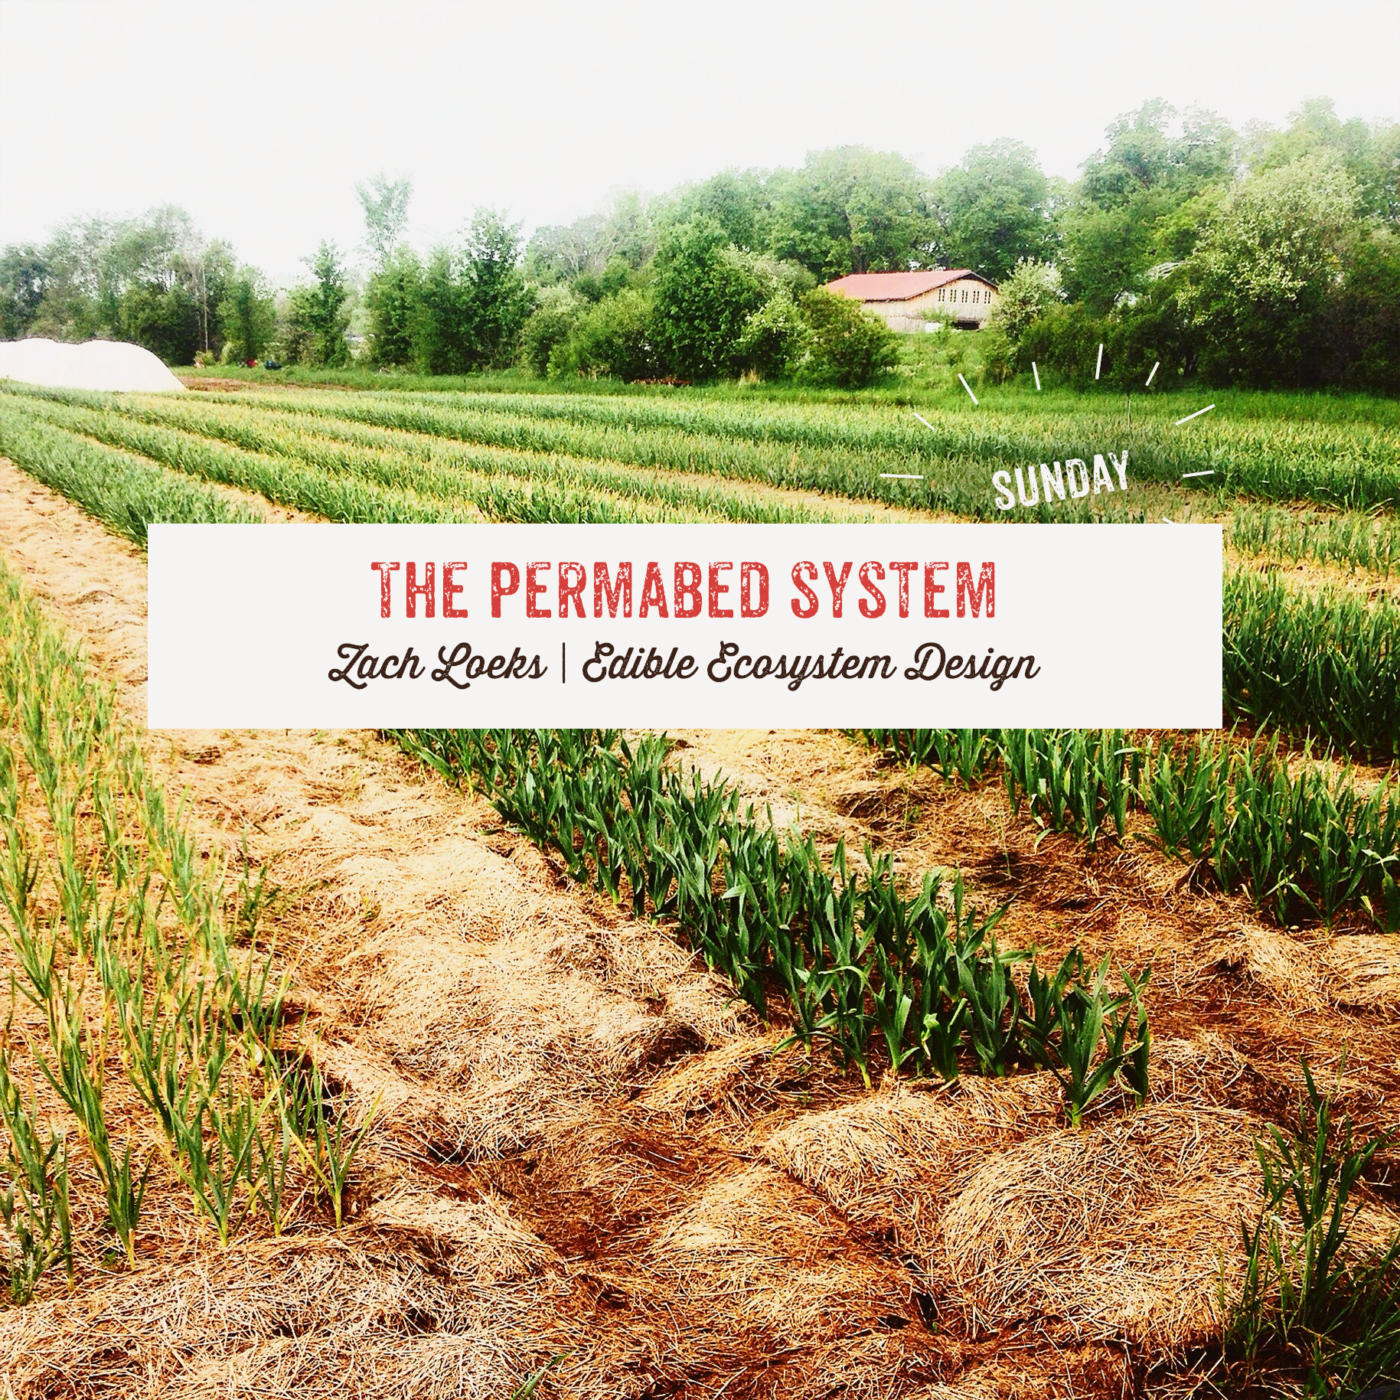 The Permabed System